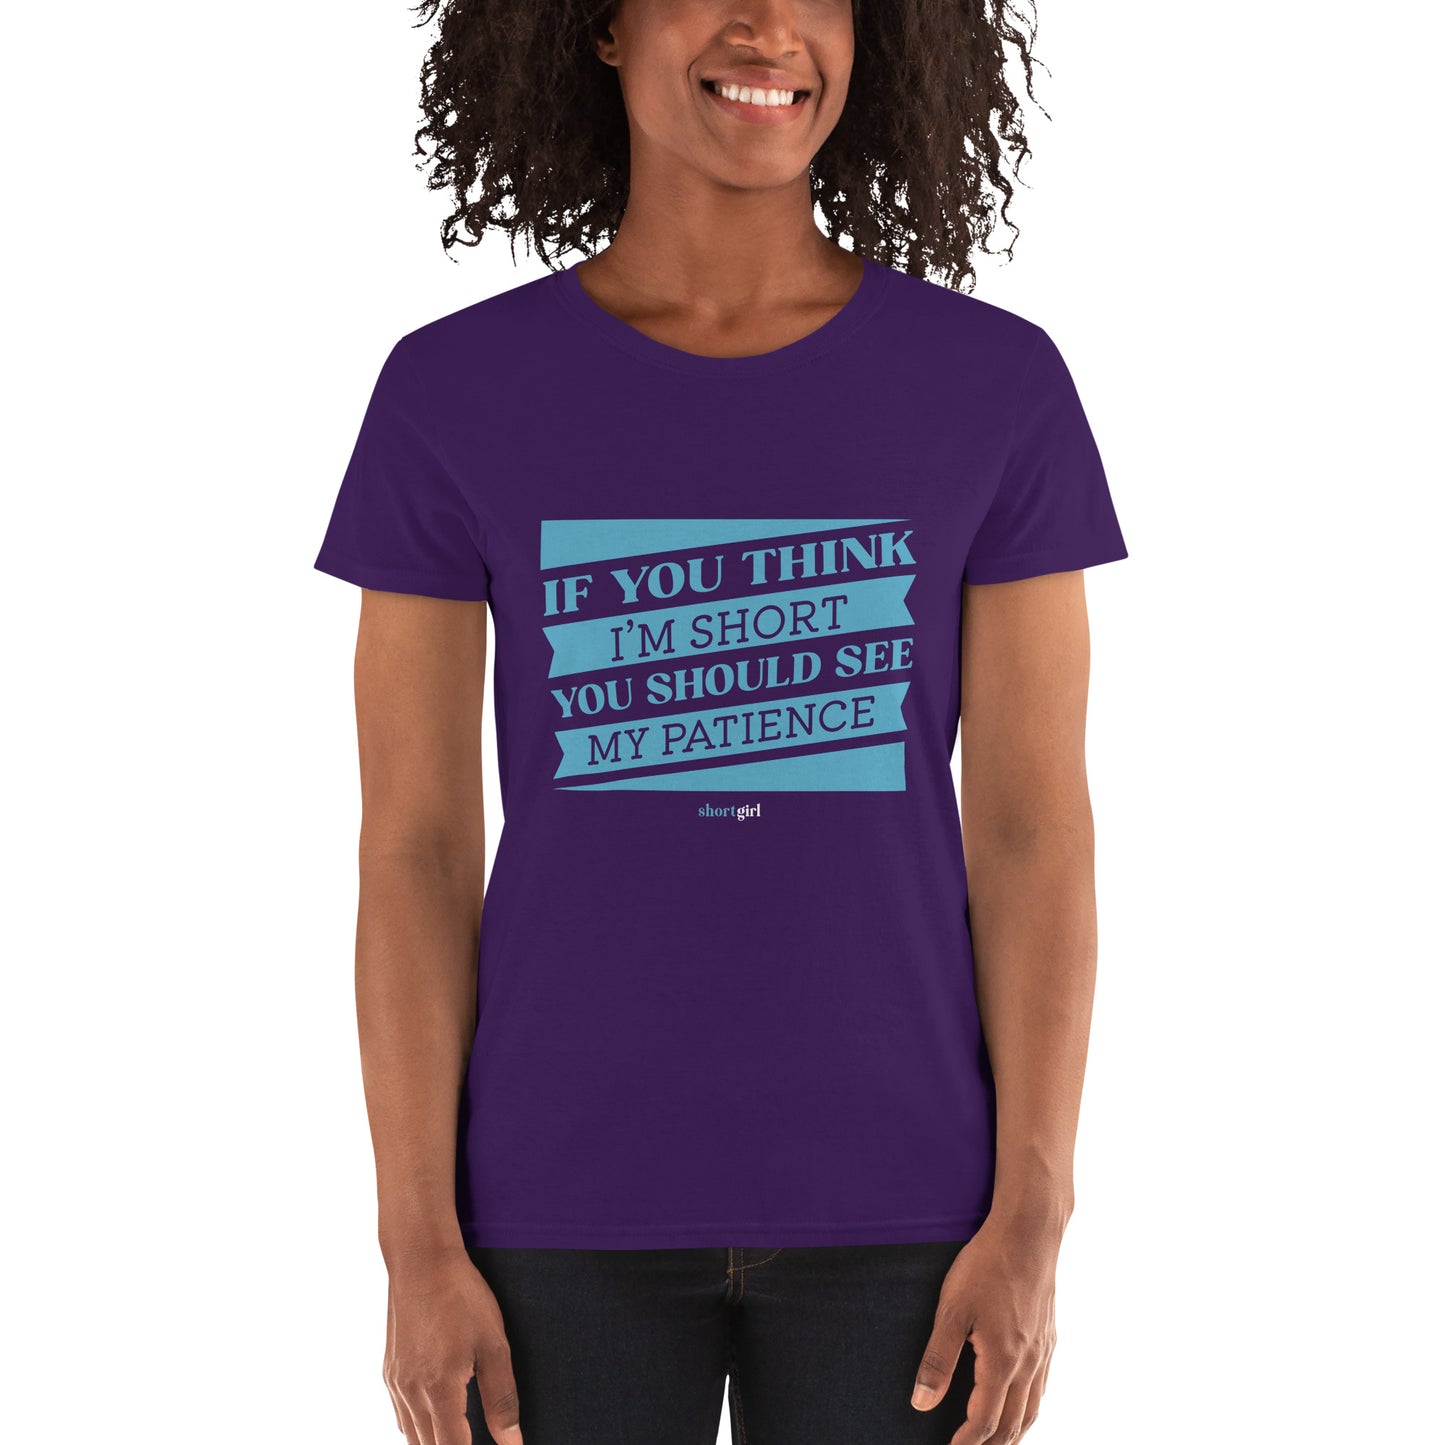 Women's short sleeve t-shirt - If you think im short, you should see my patience